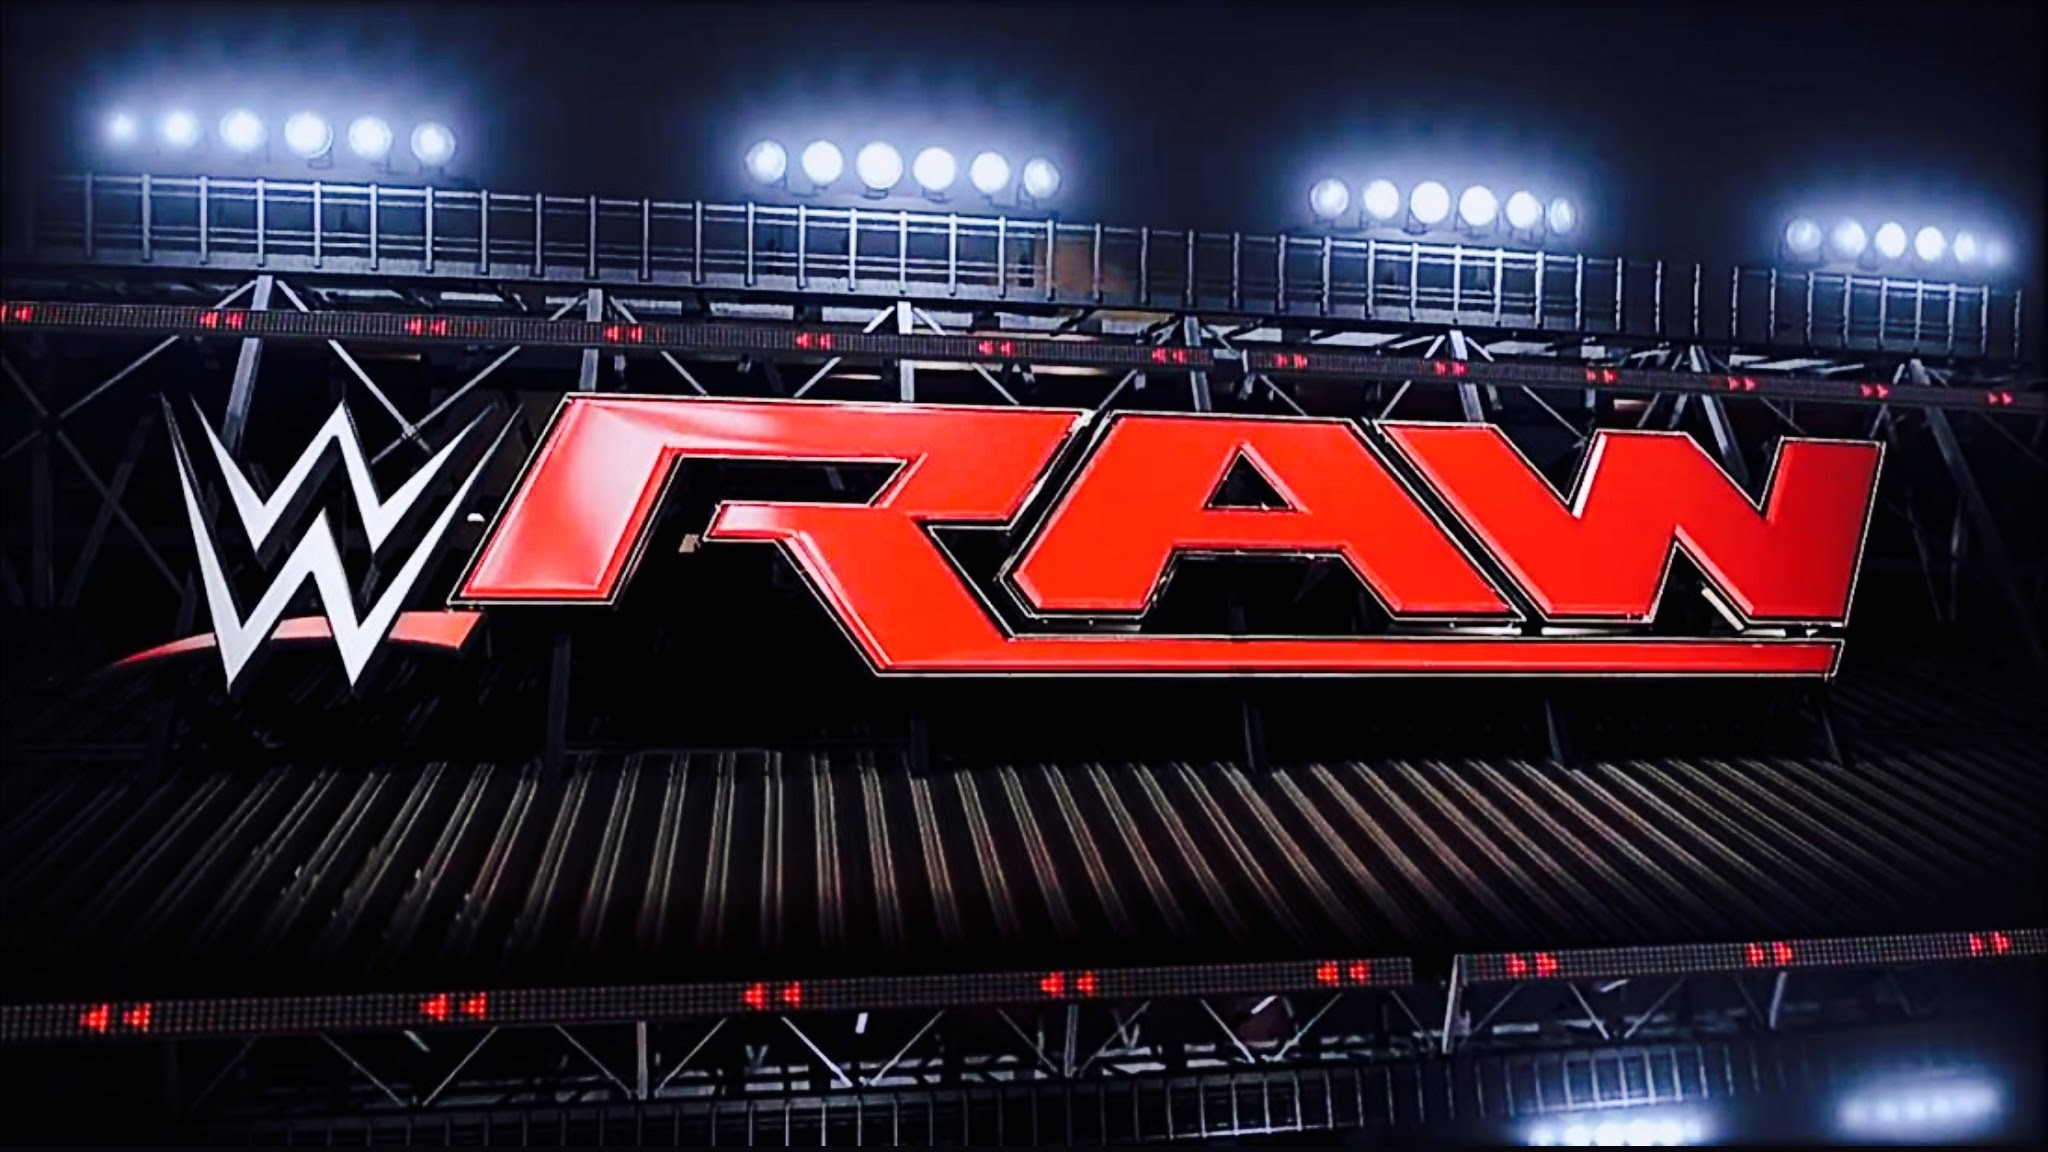 2048x1152 WWE Monday Night Raw 6/27/16 Review In 35 Seconds (Cred. JDFromNY206) -  YouTube